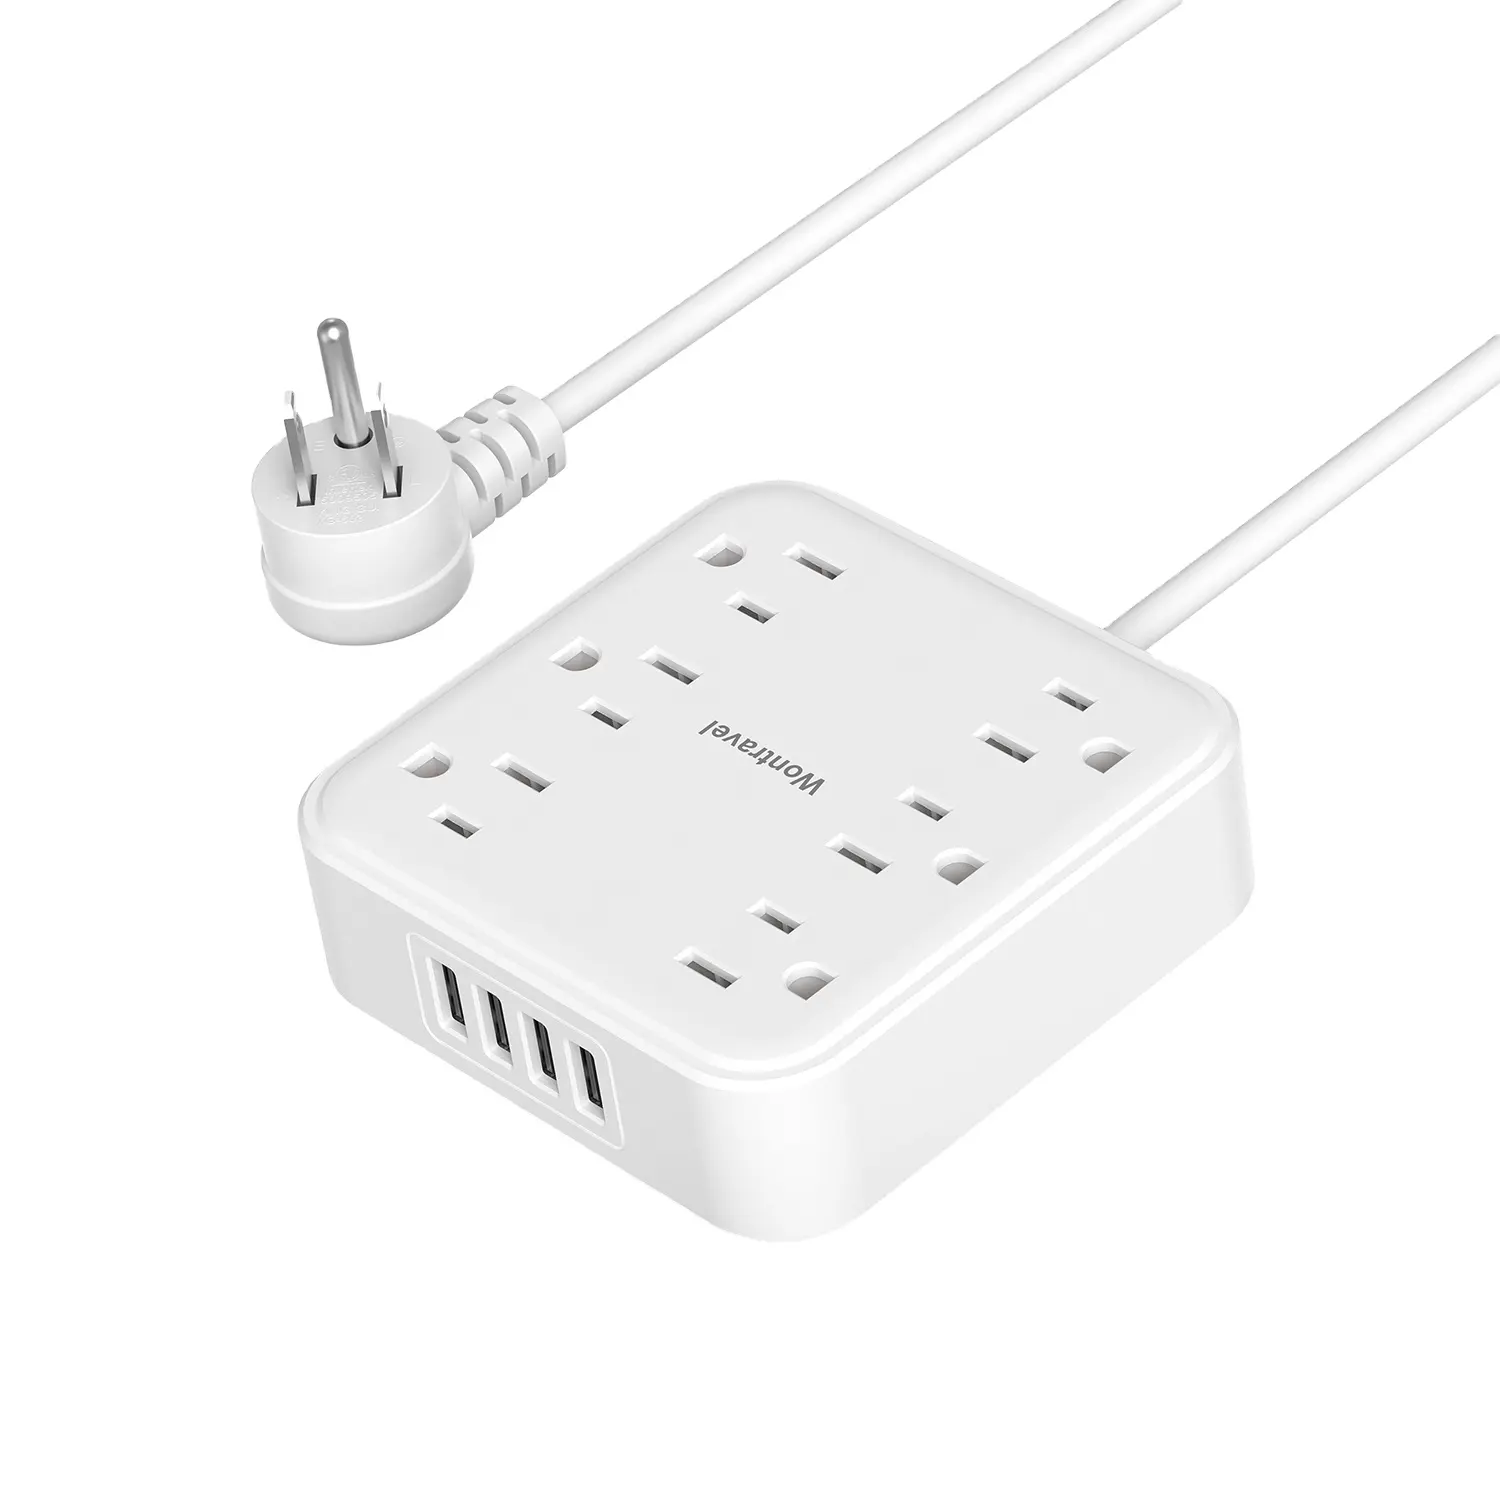 Extension Cord 6 AC Outlet Surge Protector US Power Strip USB Tabletop Socket